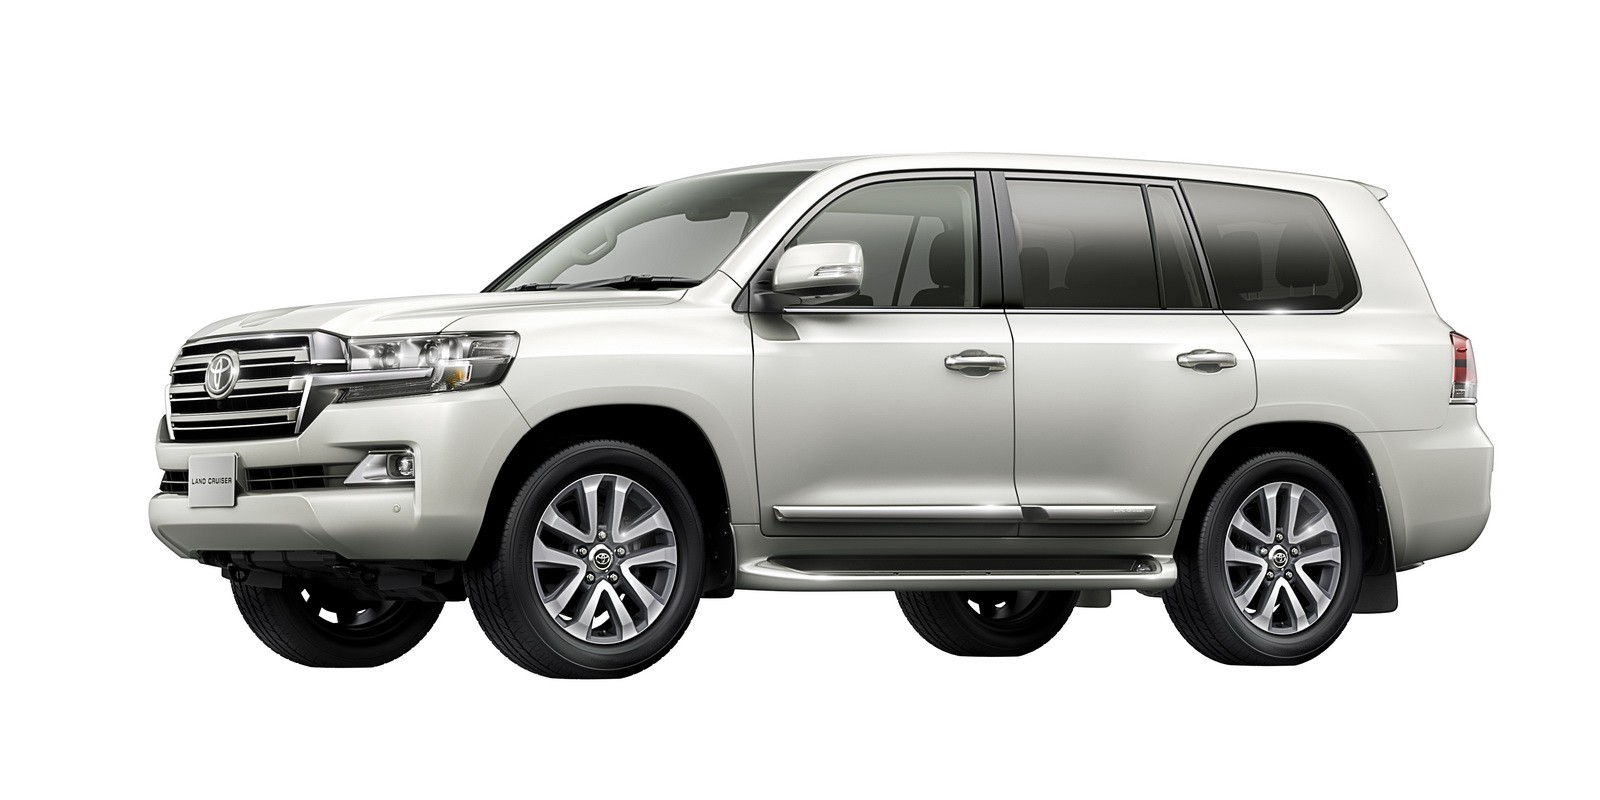 Toyota Land Cruiser 200-Series (Facelift) Generation Exterior Side View